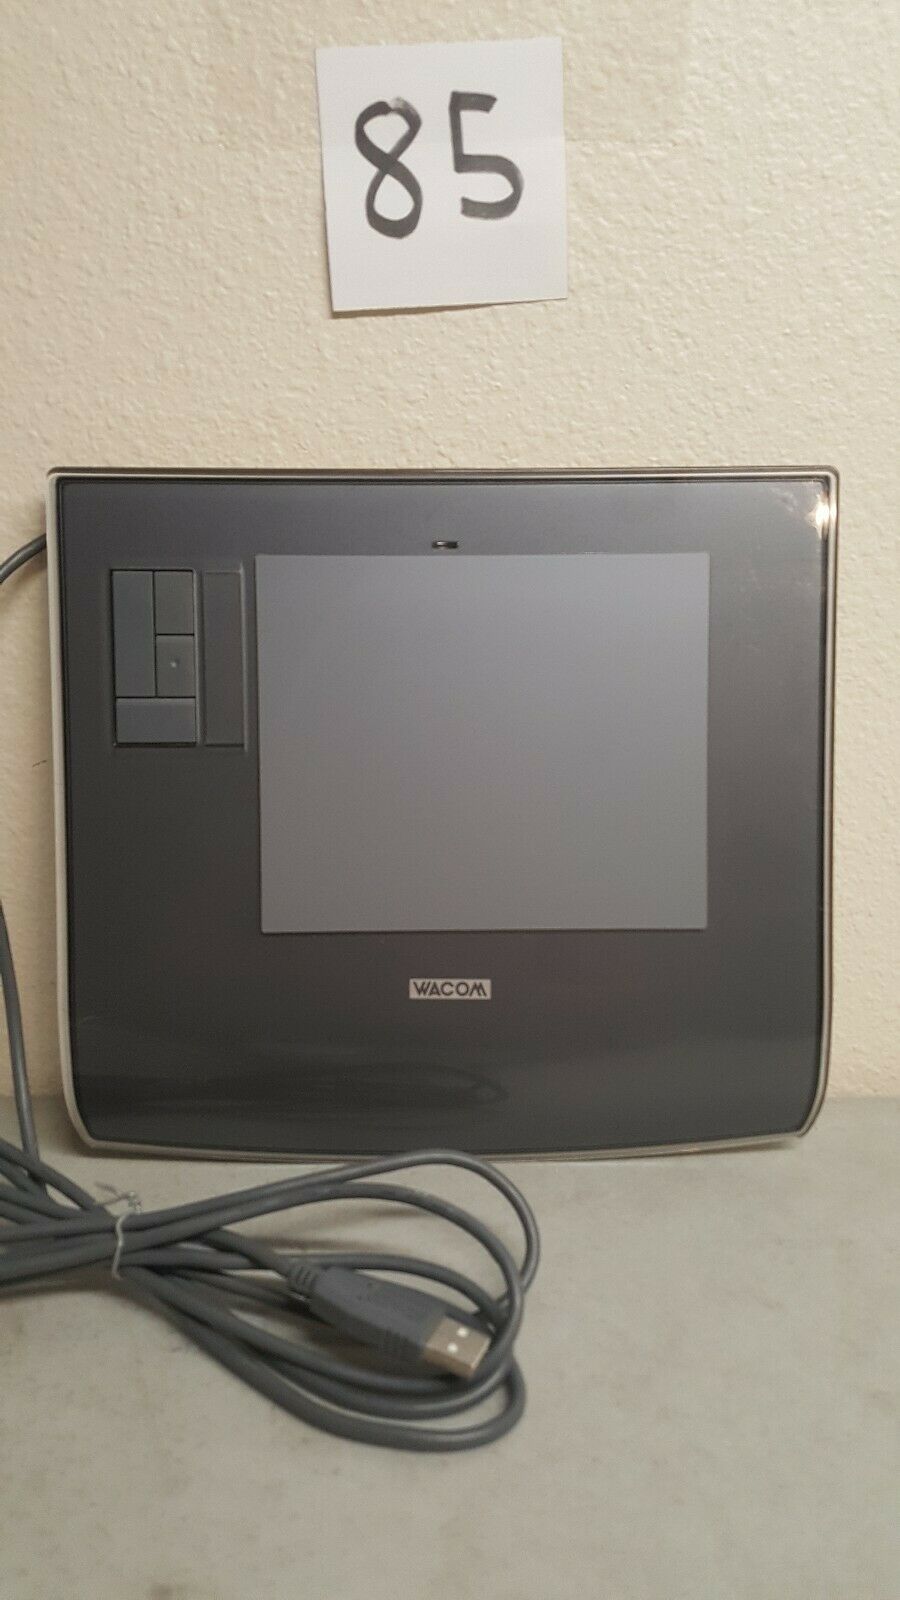 Wacom Intuos 3 PTZ-430 Graphic Drawing Tablet *FREE SHIPPING*